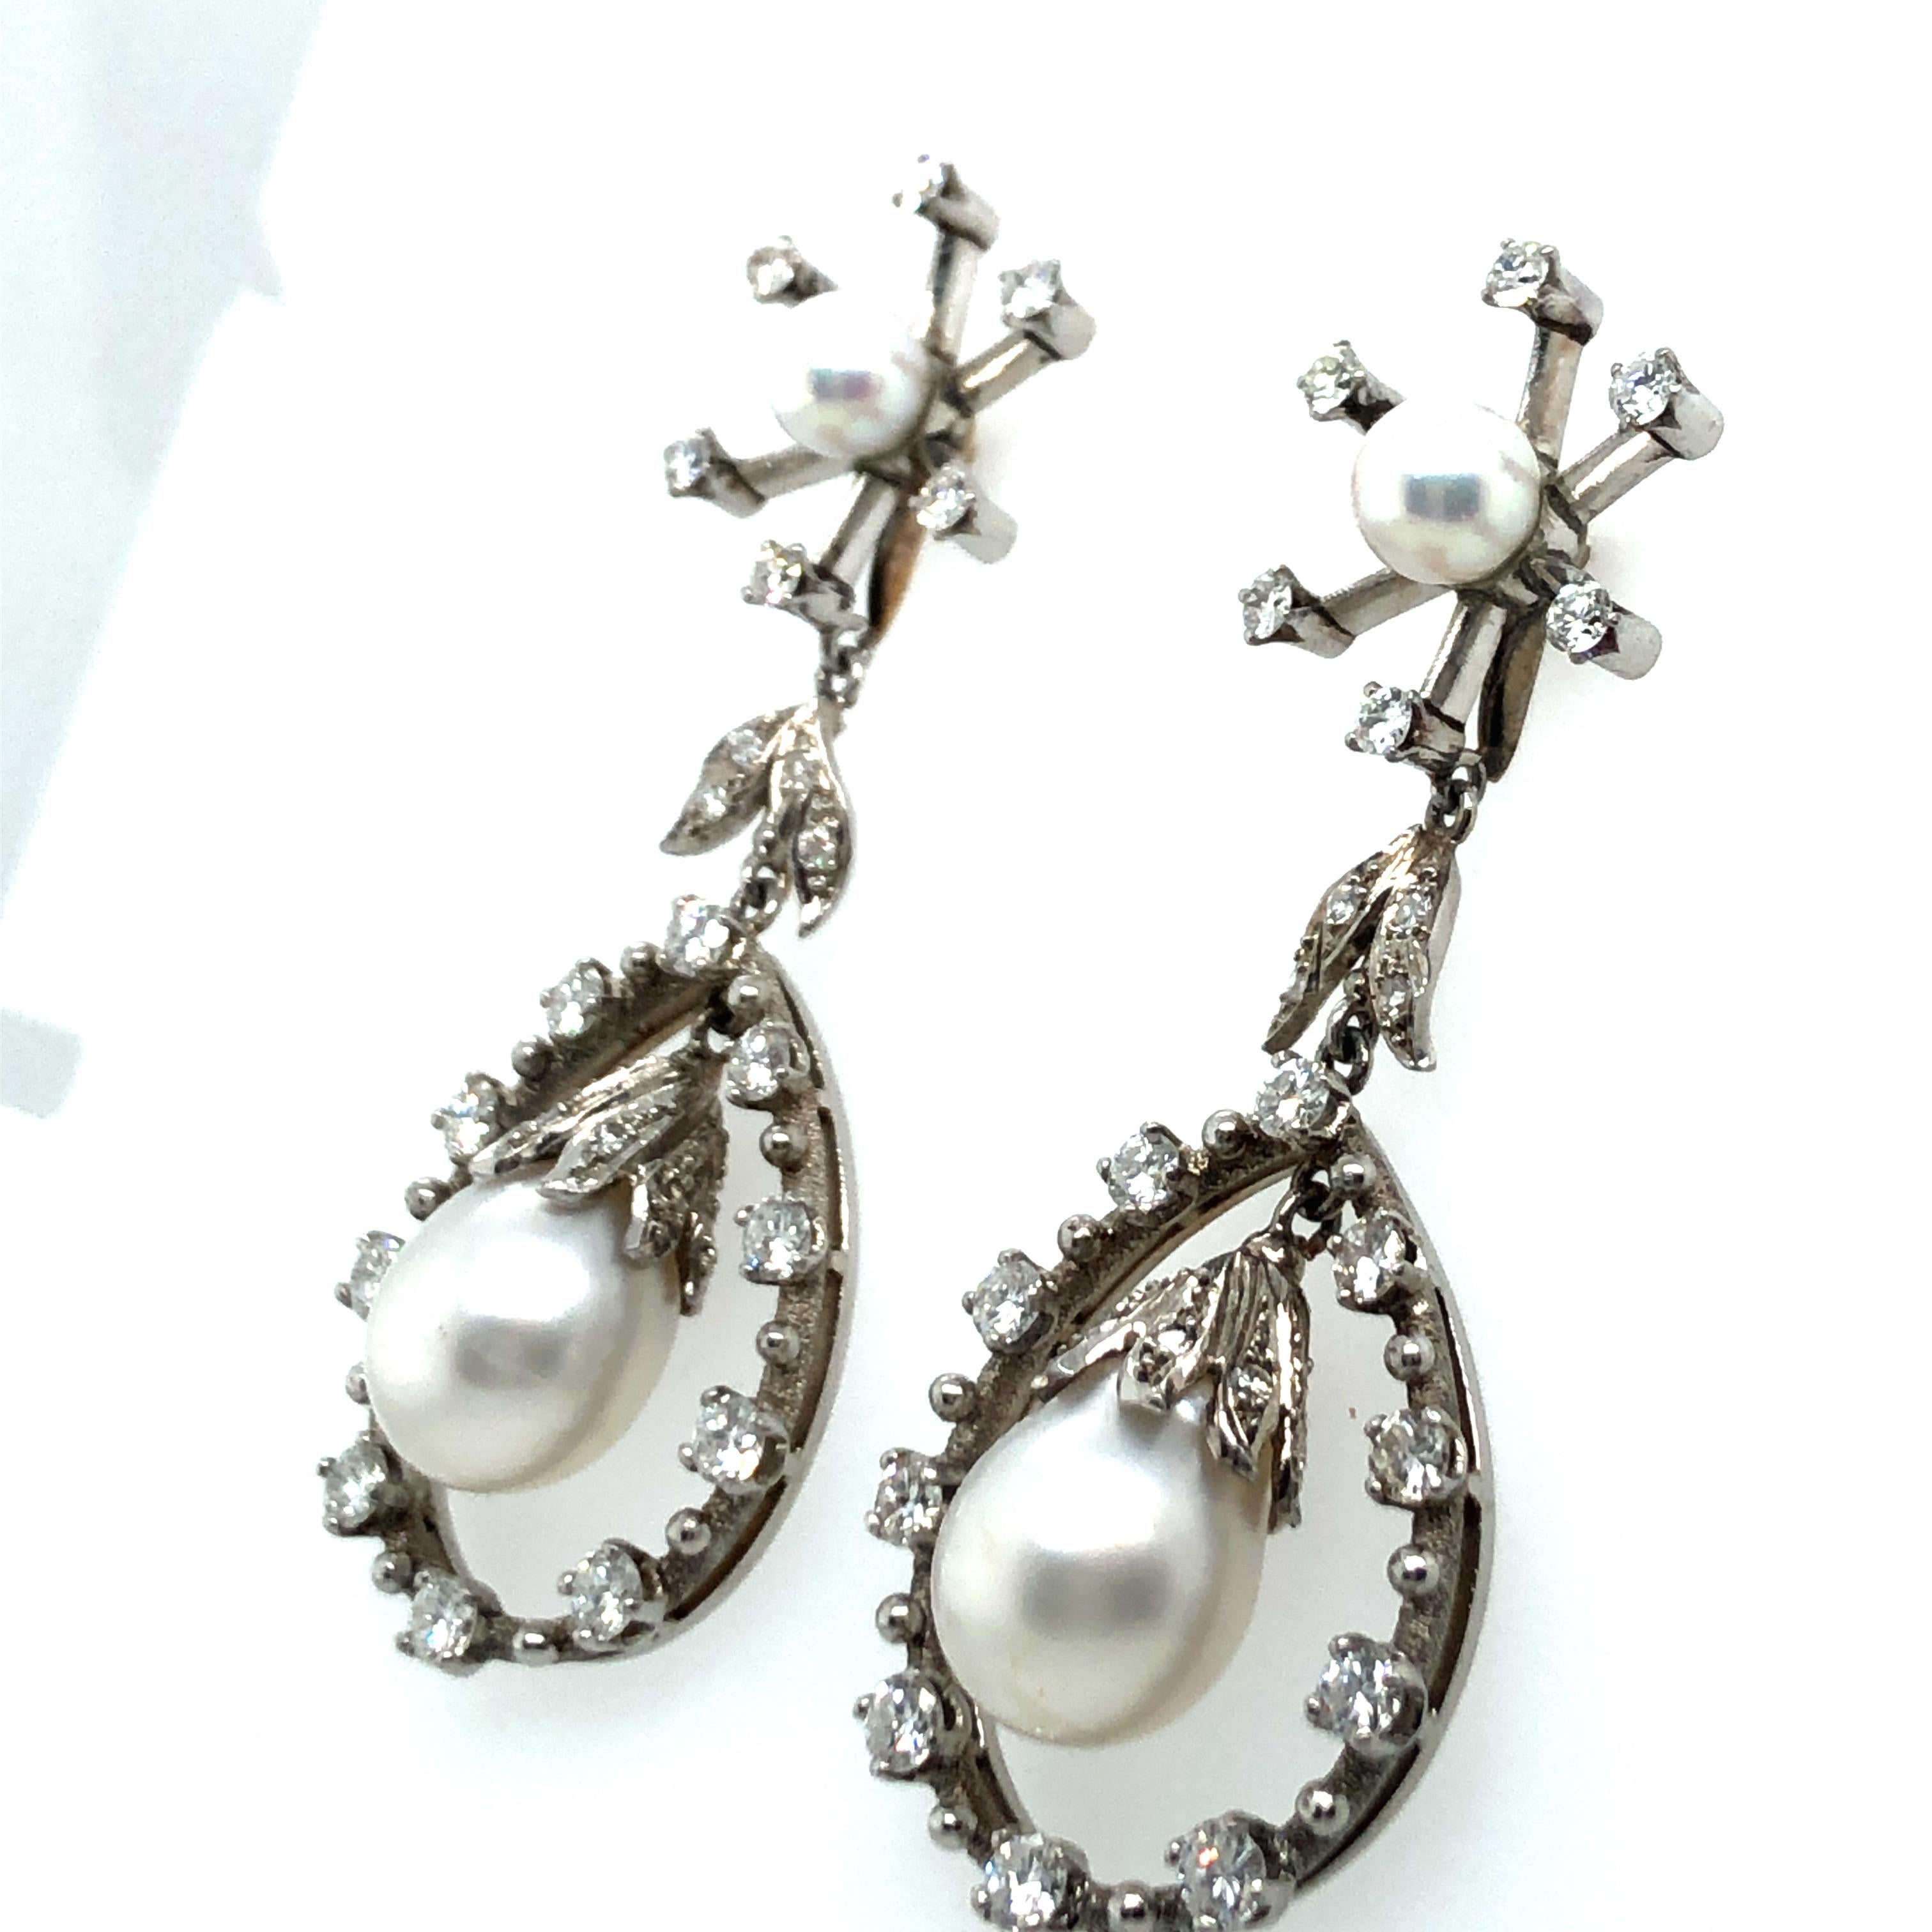 Contemporary Chandelier Earrings with Diamonds and Akoya Pearls in 18k White Gold